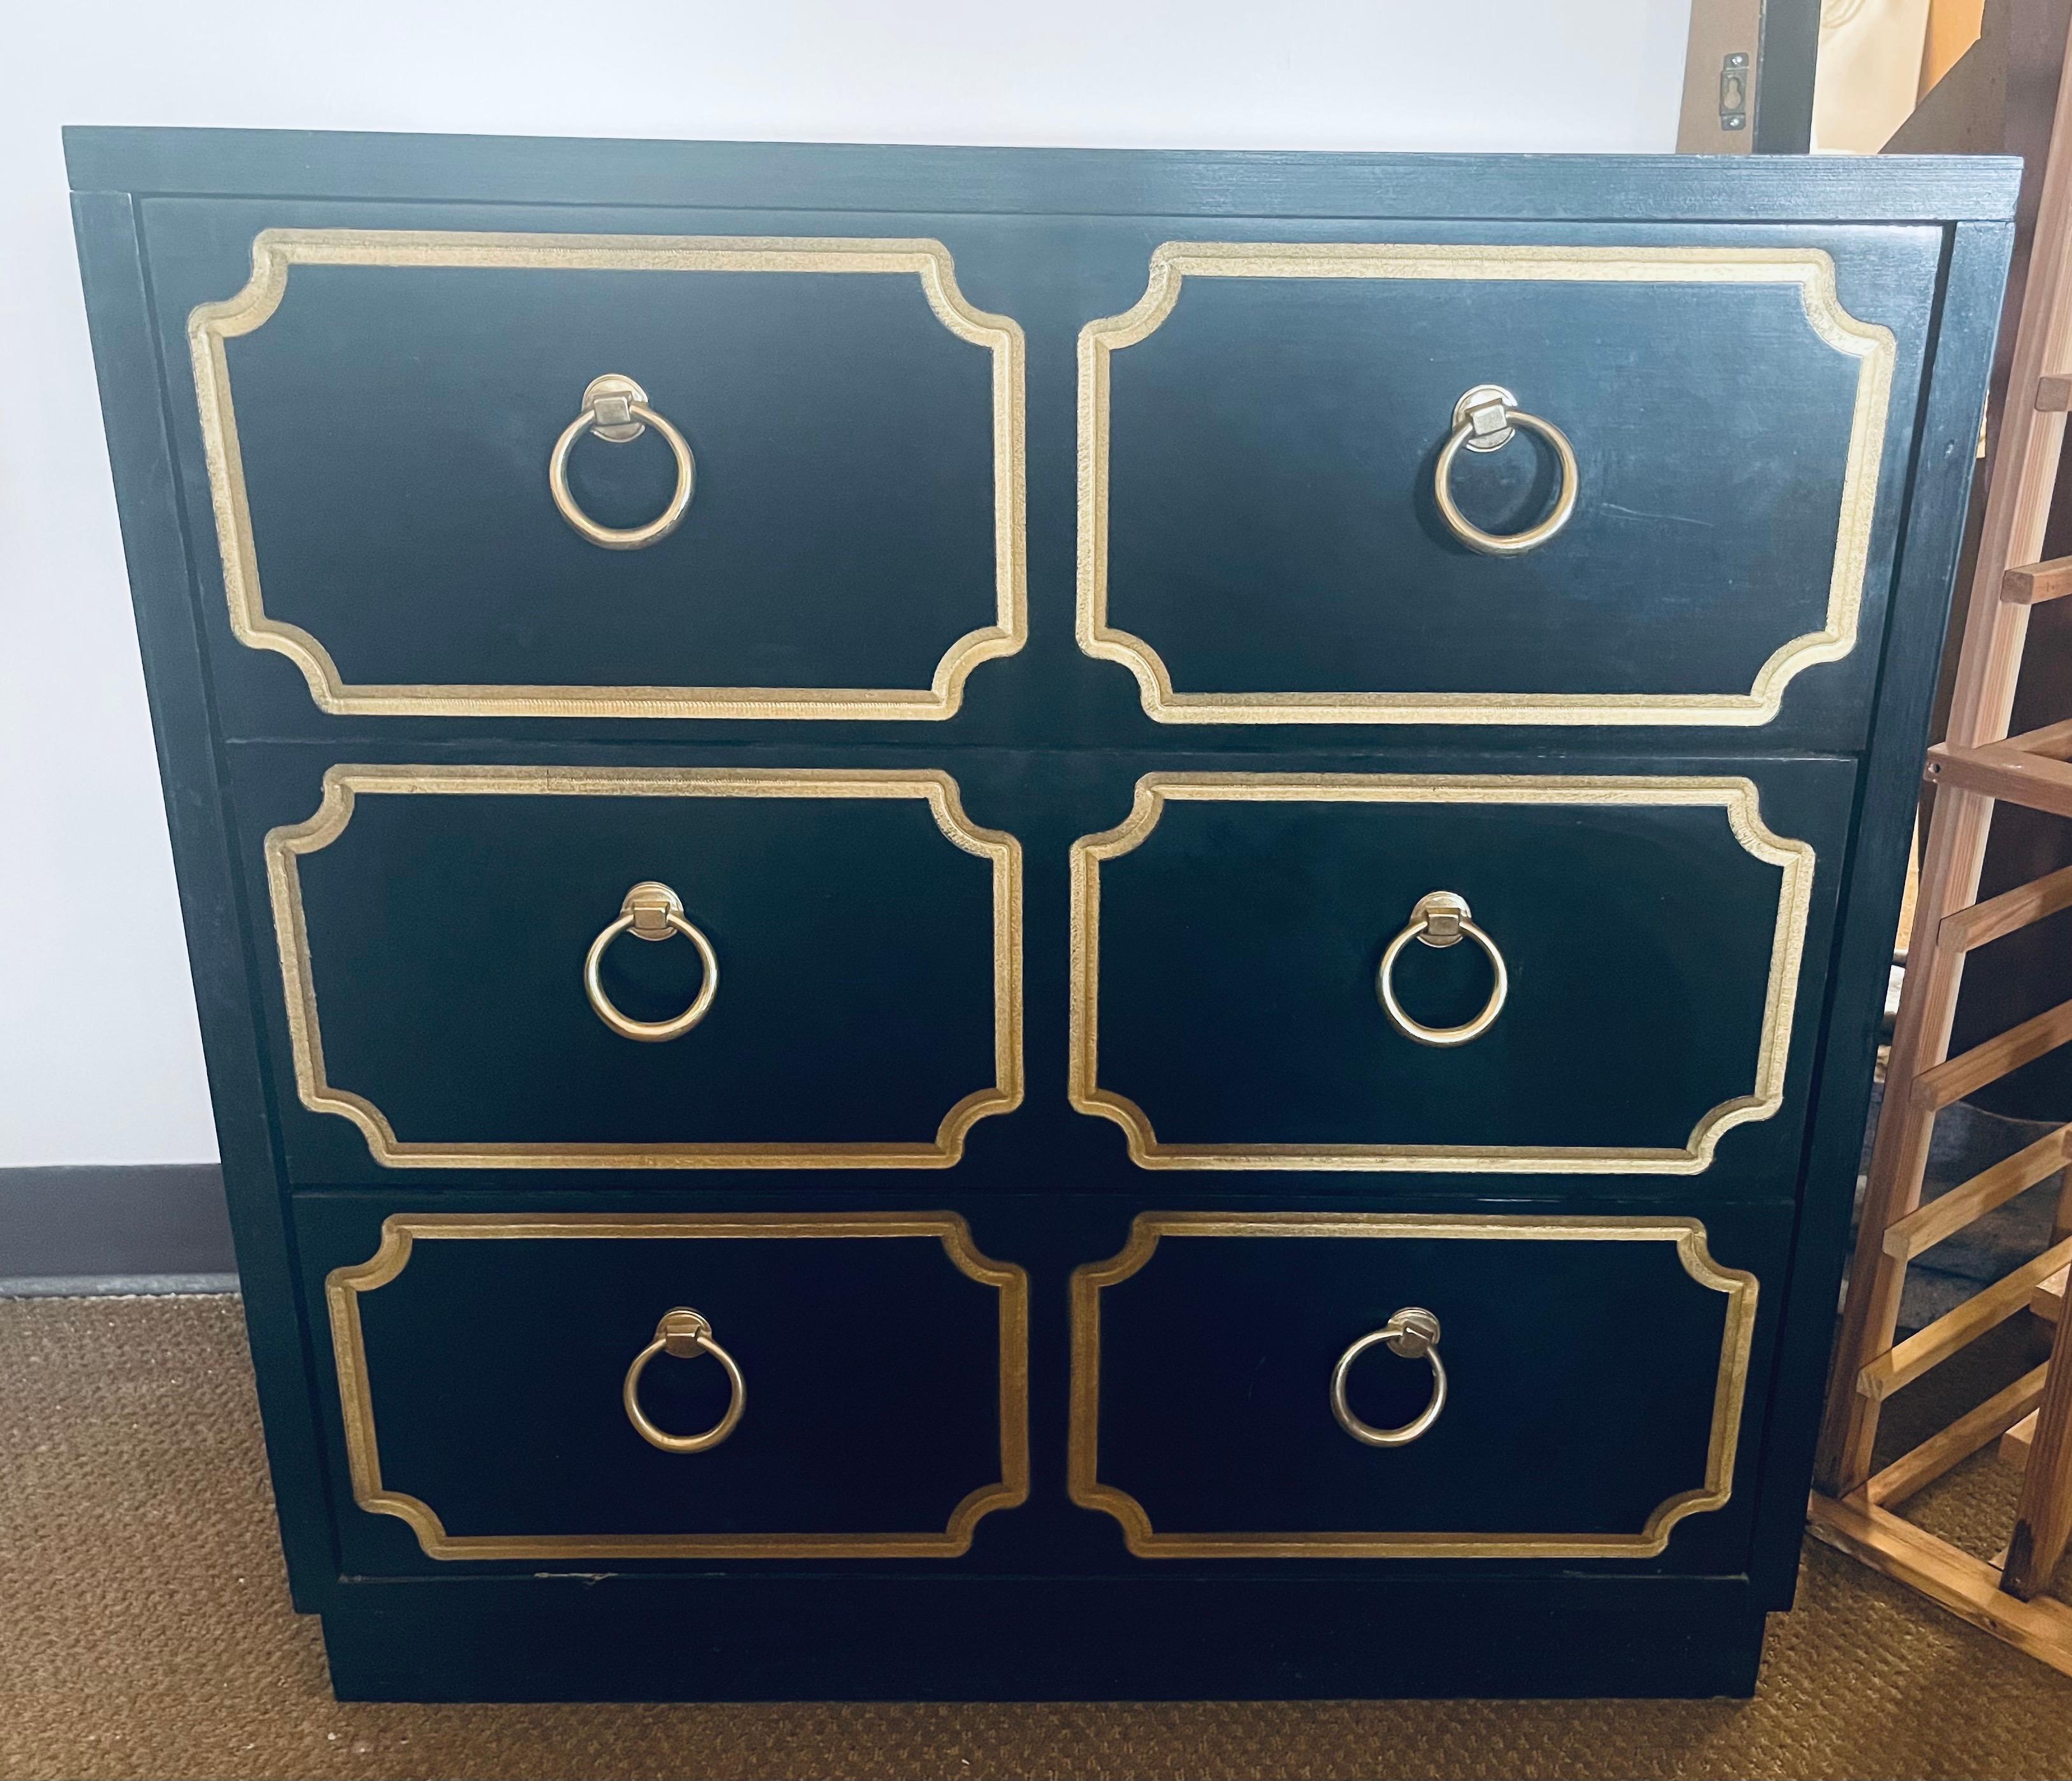 Rare Hollywood Regency chest of drawers - with three drawers and done in the style of the Heritage (Henredon) Espana line and from the same time period.  Features high gloss black and gold colors.  The thee drawers are large and the hardware